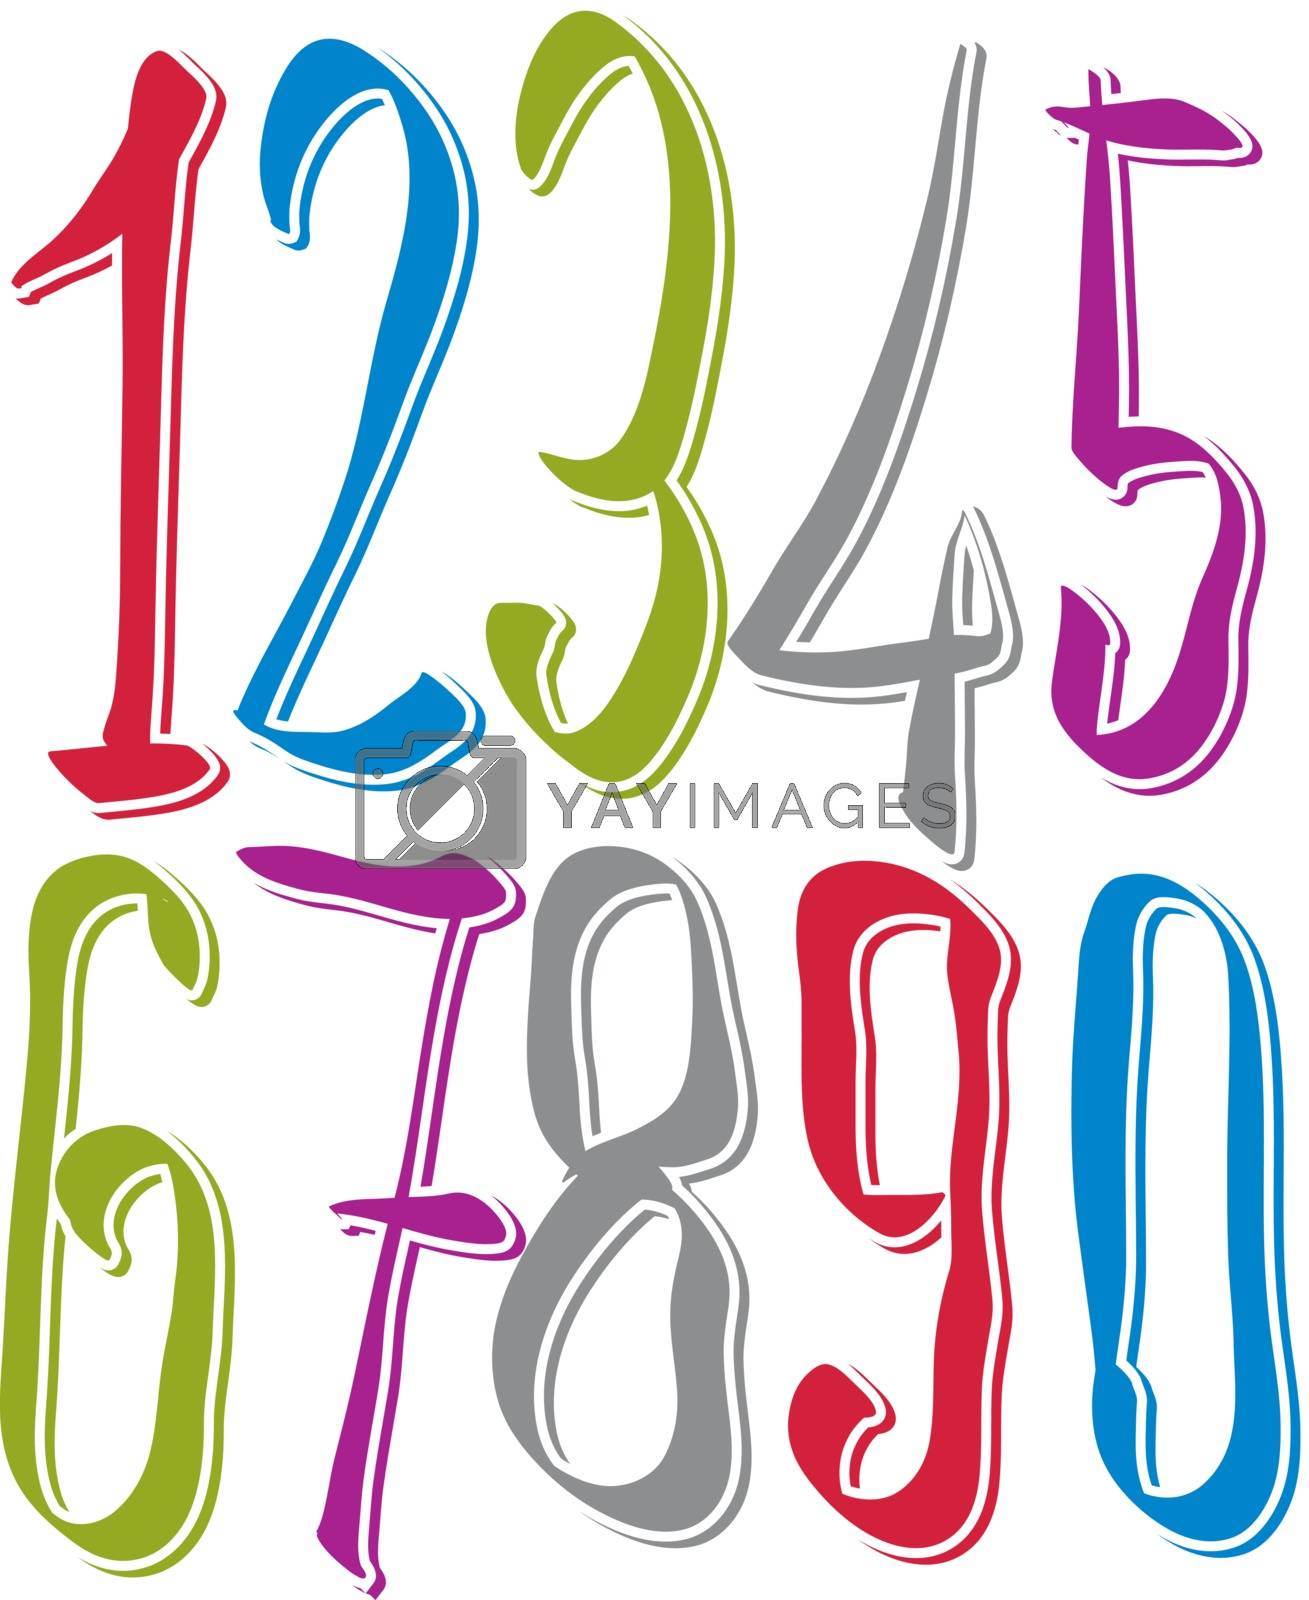 Royalty free image of Calligraphic numbers, vector numeration. by Sylverarts